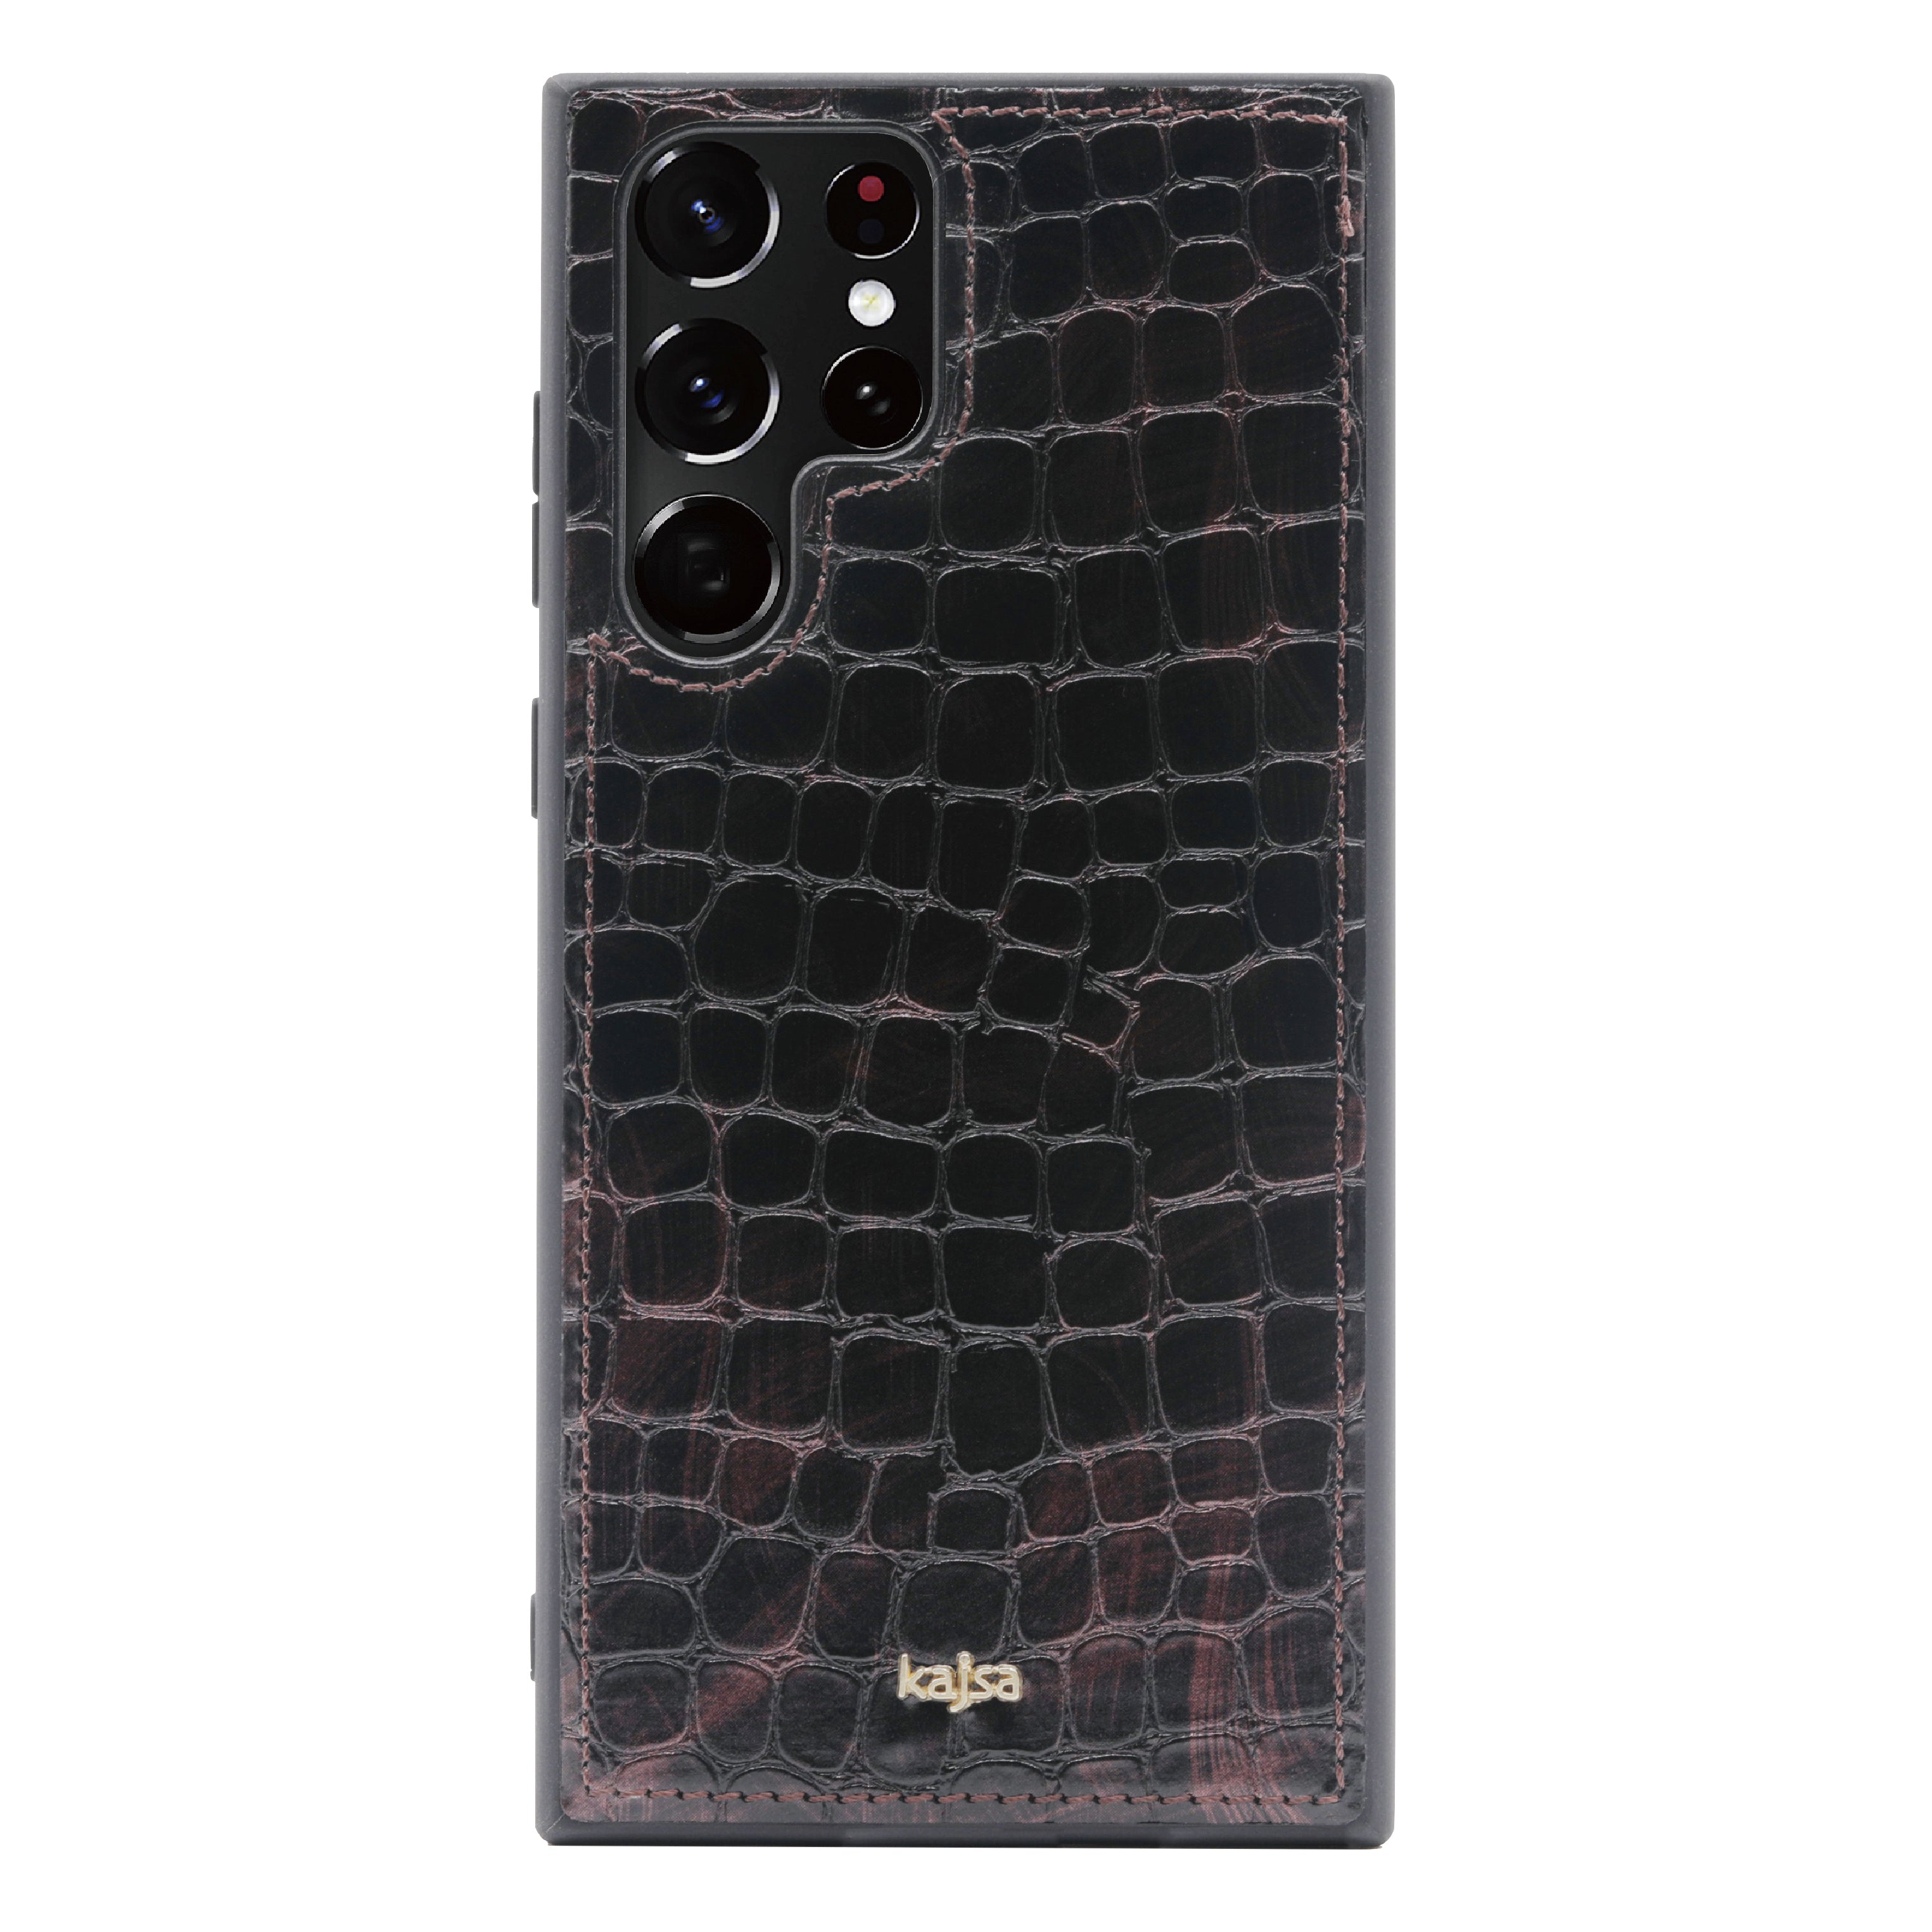 Glamorous Collection - Stone Pattern Back Case for Samsung Galaxy S23/S23+/S23 Ultra-Phone Case- phone case - phone cases- phone cover- iphone cover- iphone case- iphone cases- leather case- leather cases- DIYCASE - custom case - leather cover - hand strap case - croco pattern case - snake pattern case - carbon fiber phone case - phone case brand - unique phone case - high quality - phone case brand - protective case - buy phone case hong kong - online buy phone case - iphone‎手機殼 - 客製化手機殼 - samsung ‎手機殼 - 香